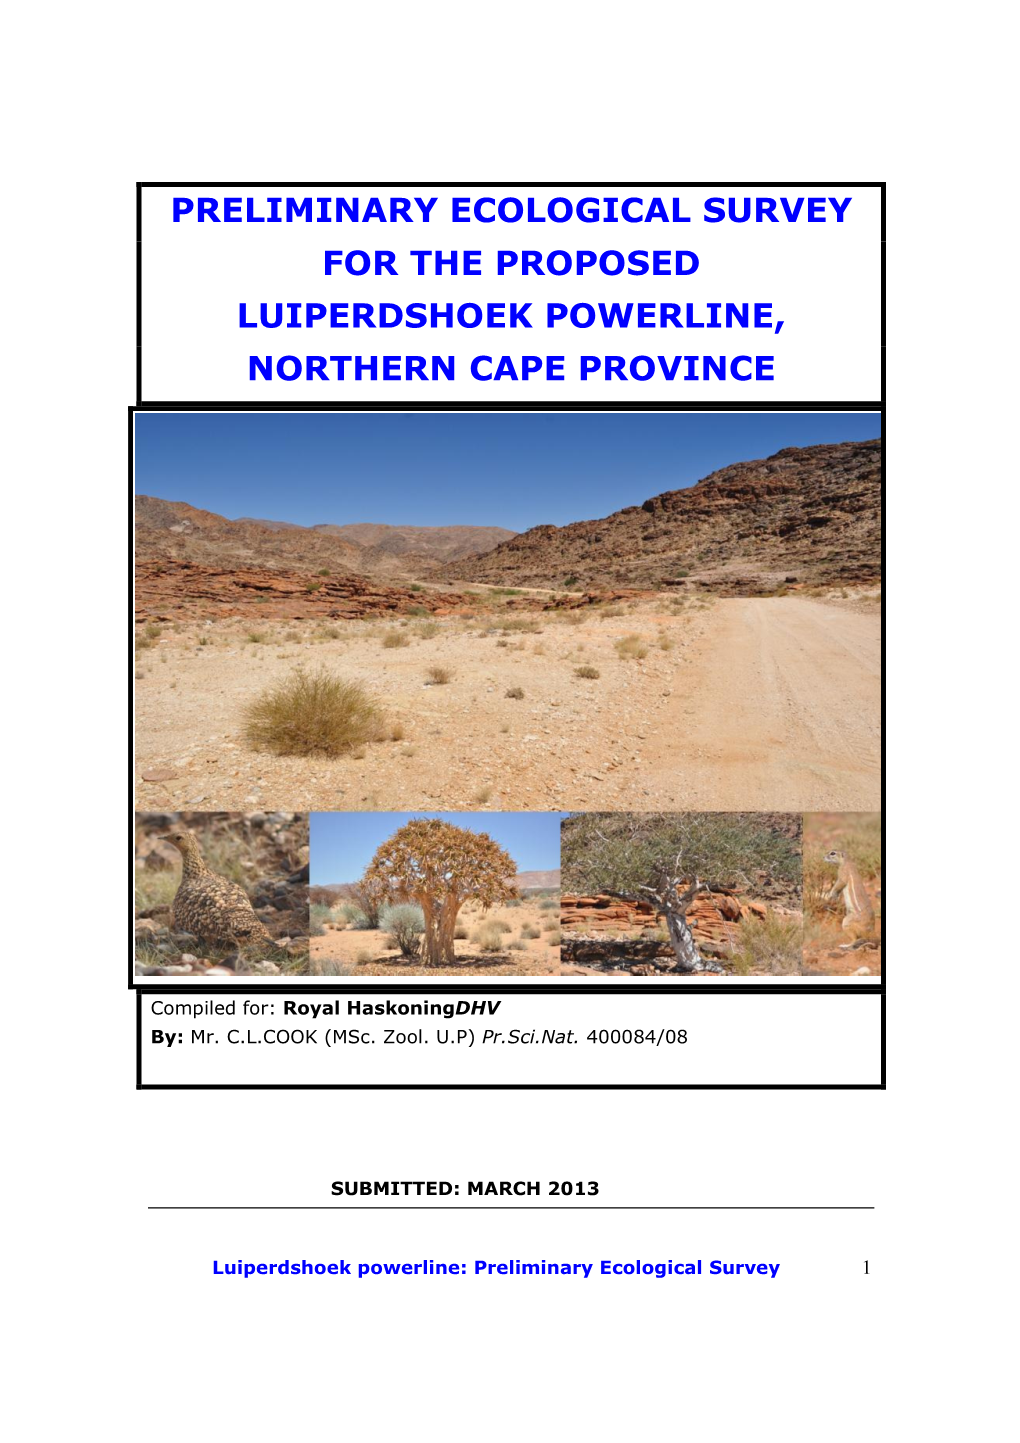 Preliminary Ecological Survey for the Proposed Luiperdshoek Powerline, Northern Cape Province